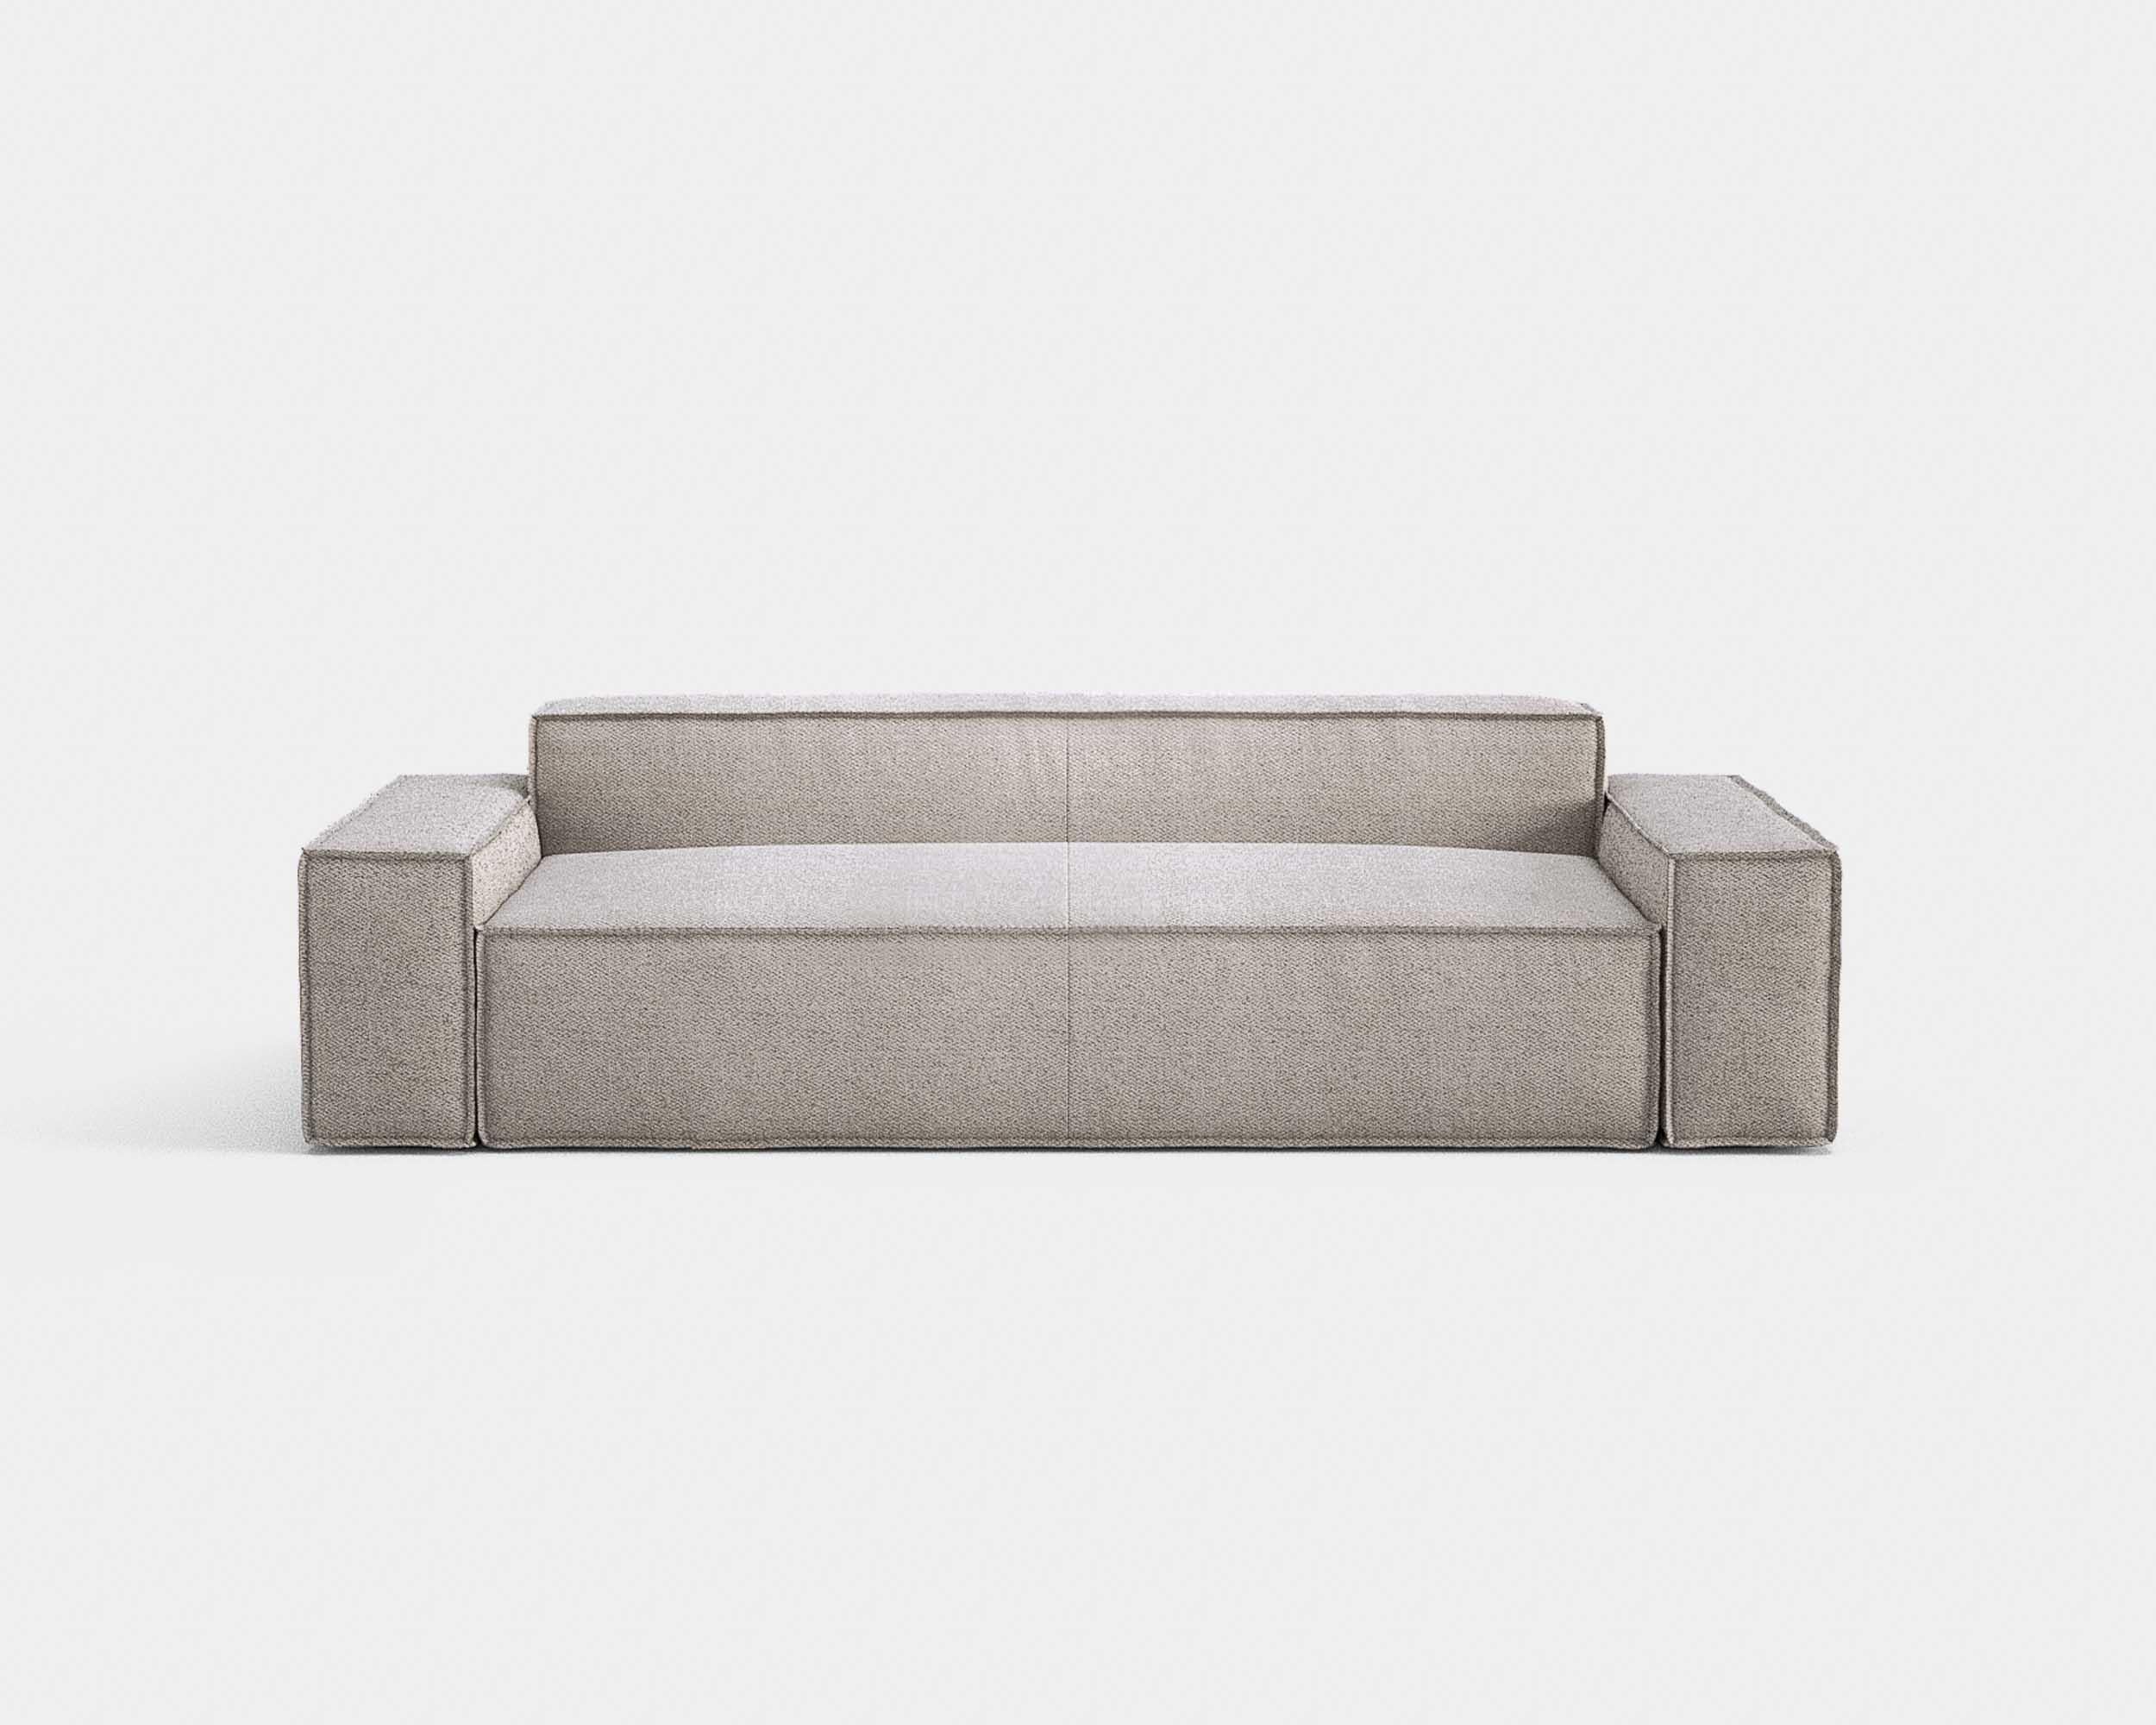 Davis sofa by Amura Lab.
Model 060.

Dimensions : H. 67 x 250 x 100 cm.

Fabric reference in picture : Brera 850 - white 01.
(Non-contractual fabric rendering).

More modules available in different fabrics and colors.
 
“A refined game of